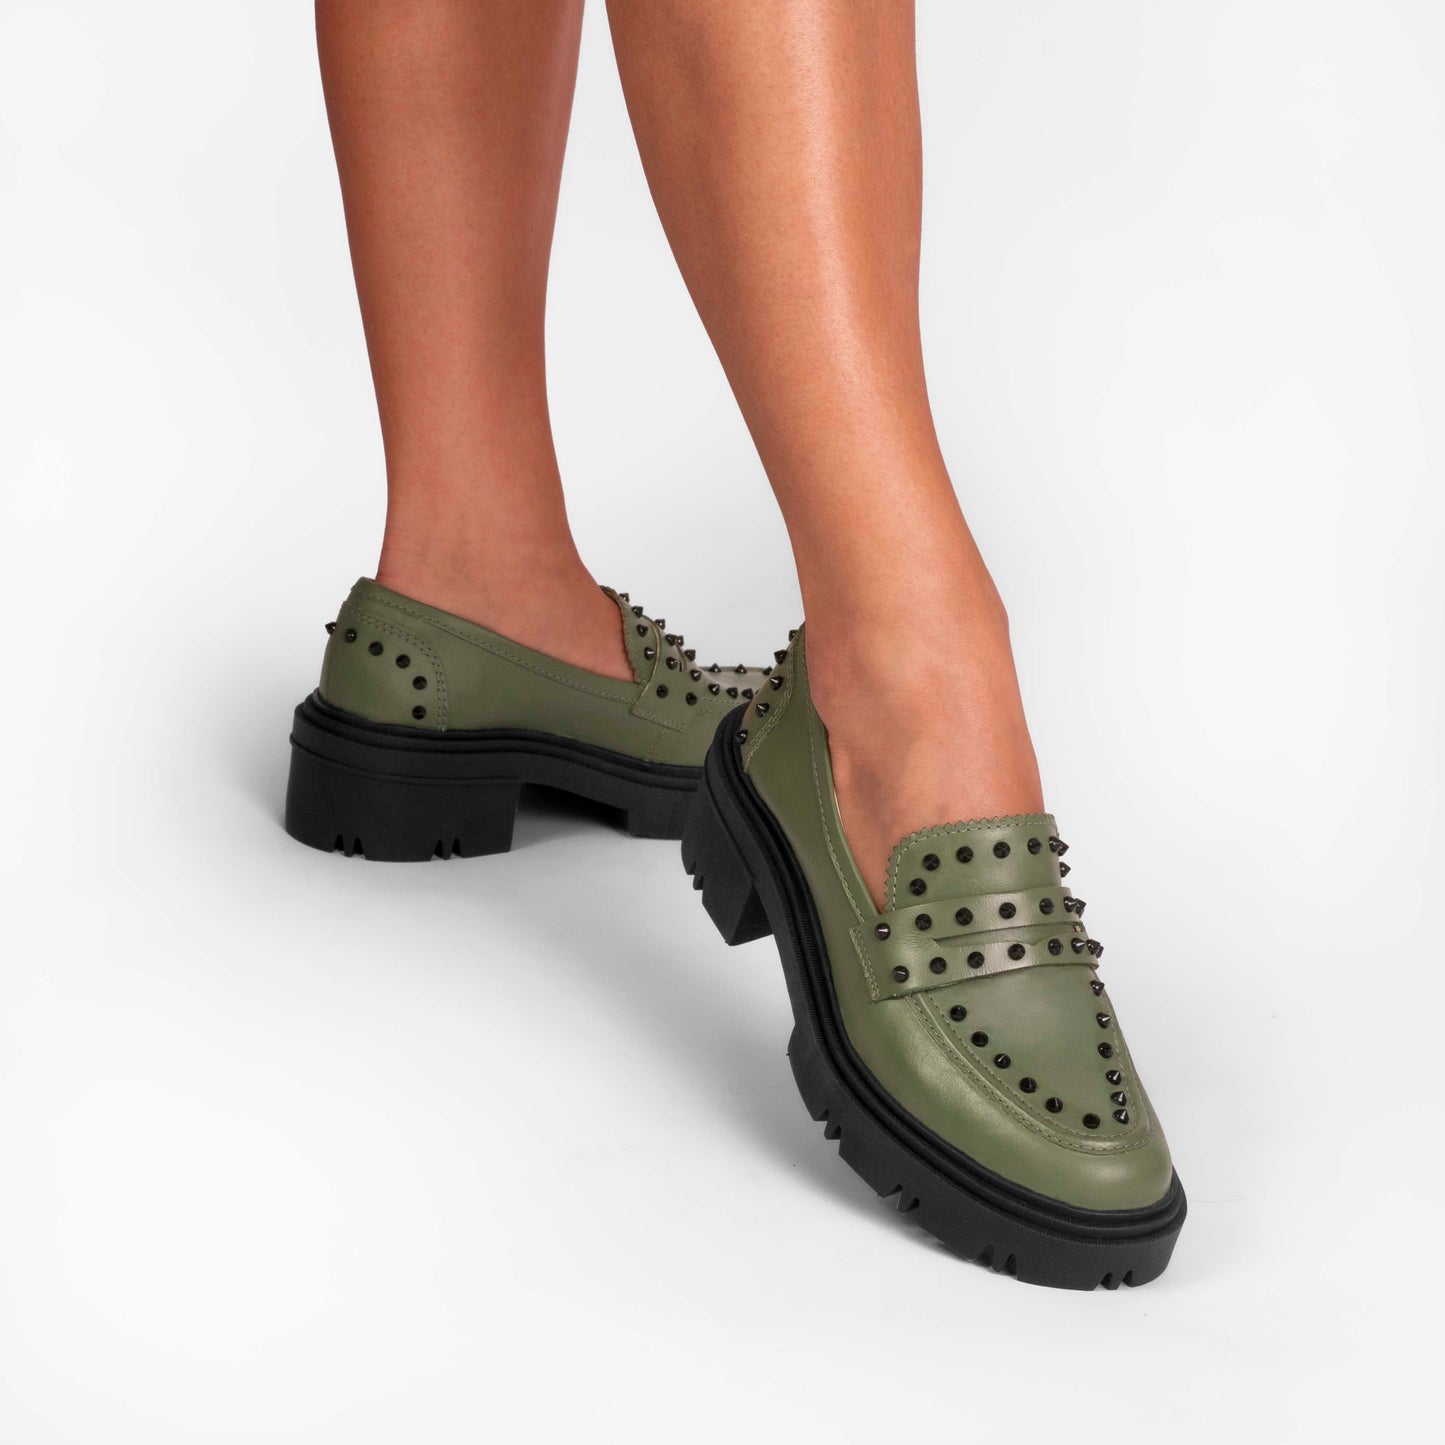 Vinci Shoes Dara Studded Military Green Loafers